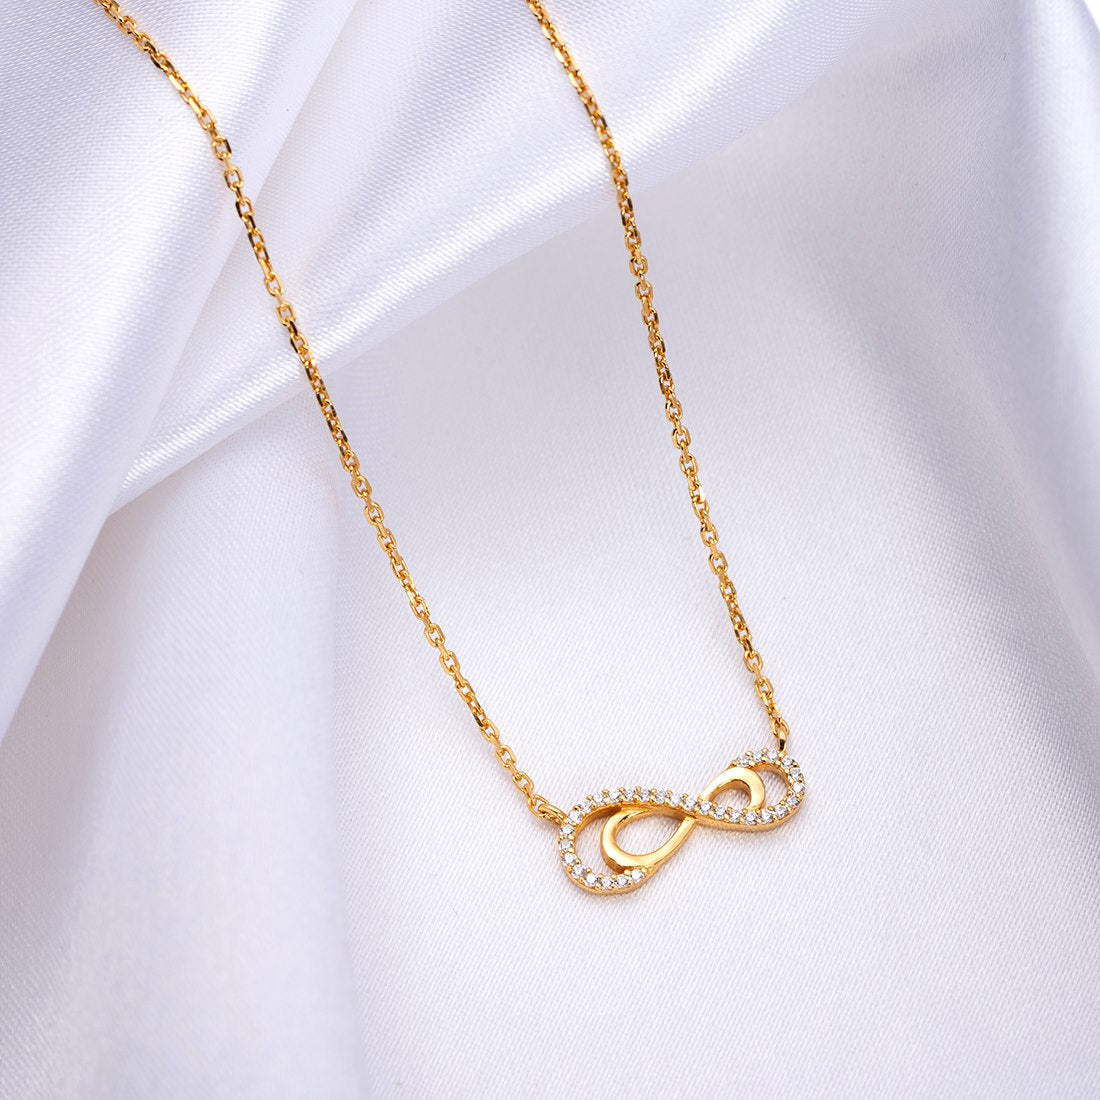 Infinite Radiance Elegance Gold-Plated 925 Sterling Silver Necklace